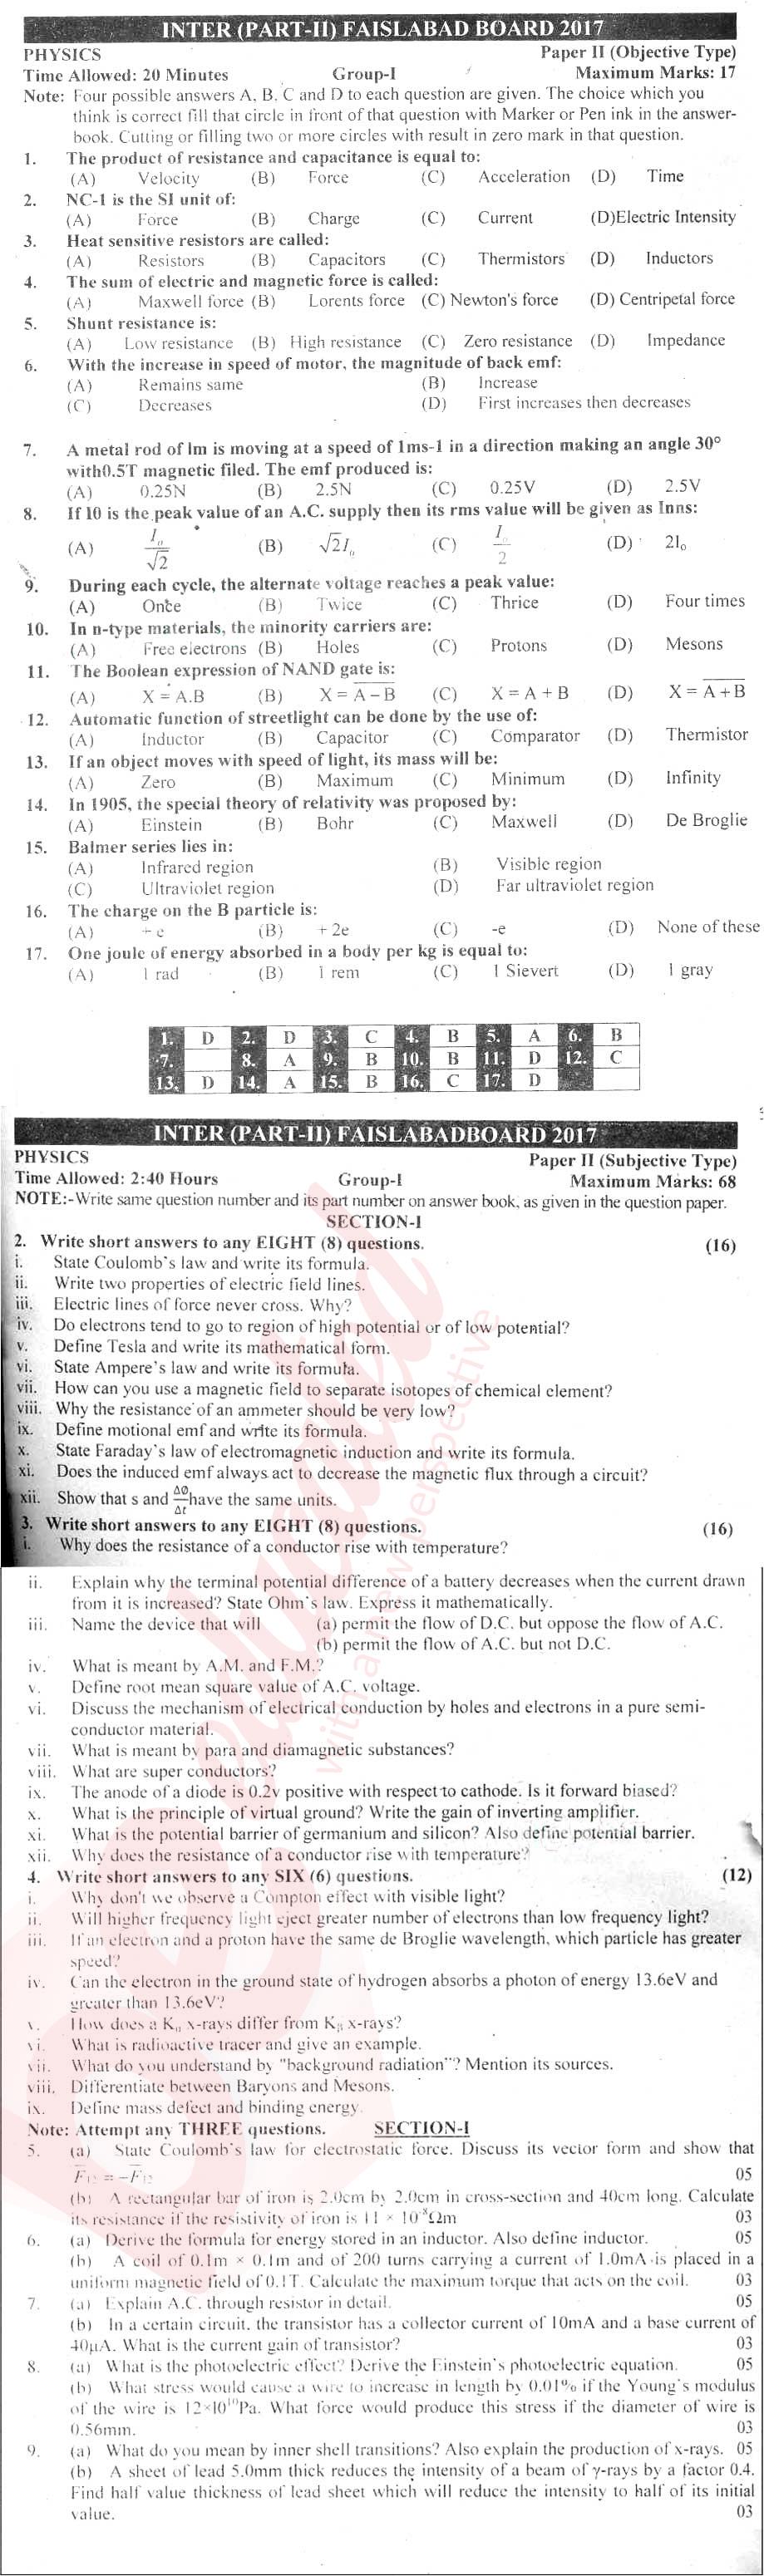 Physics 12th class Past Paper Group 1 BISE Faisalabad 2017